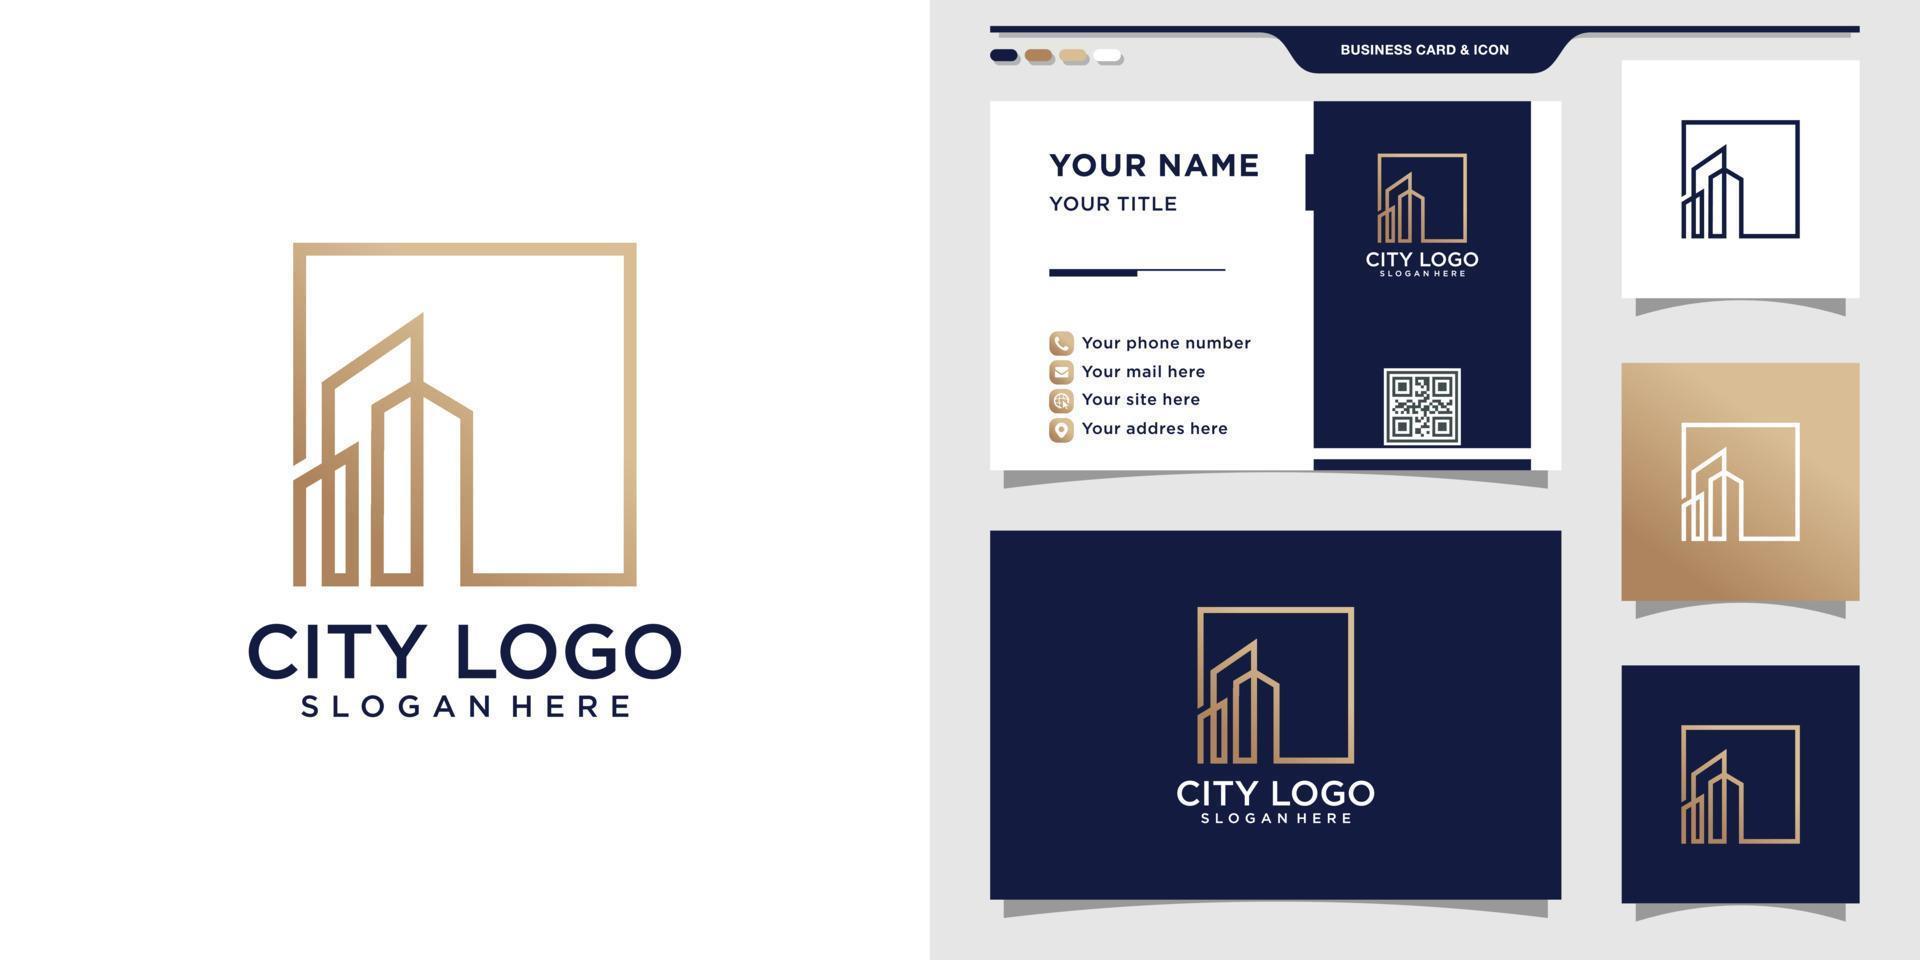 City logo with line art style and business card design Premium Vector